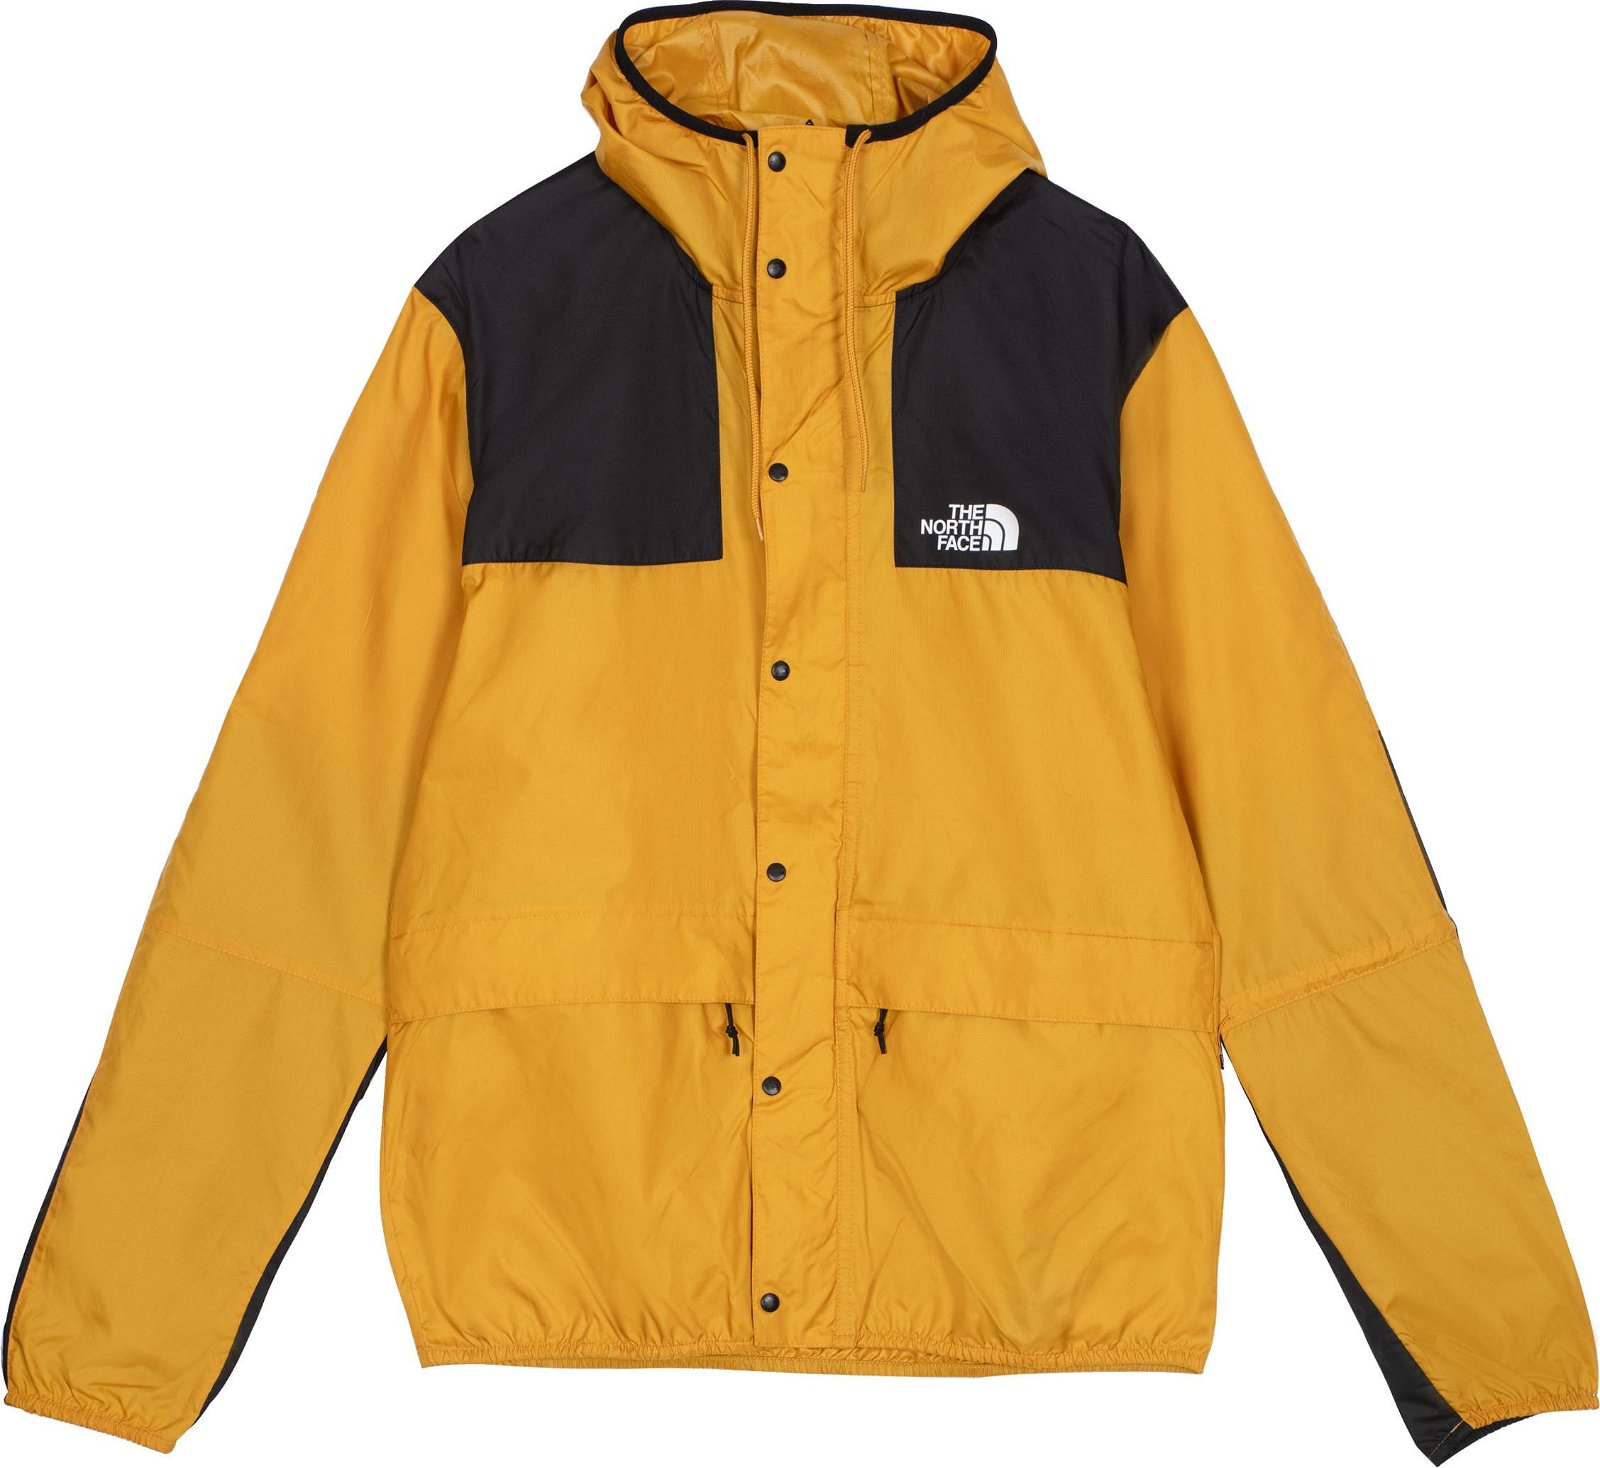 Jacket The North Face 1985 Seasonal Mountain Jacket nf00ch37h9d1 